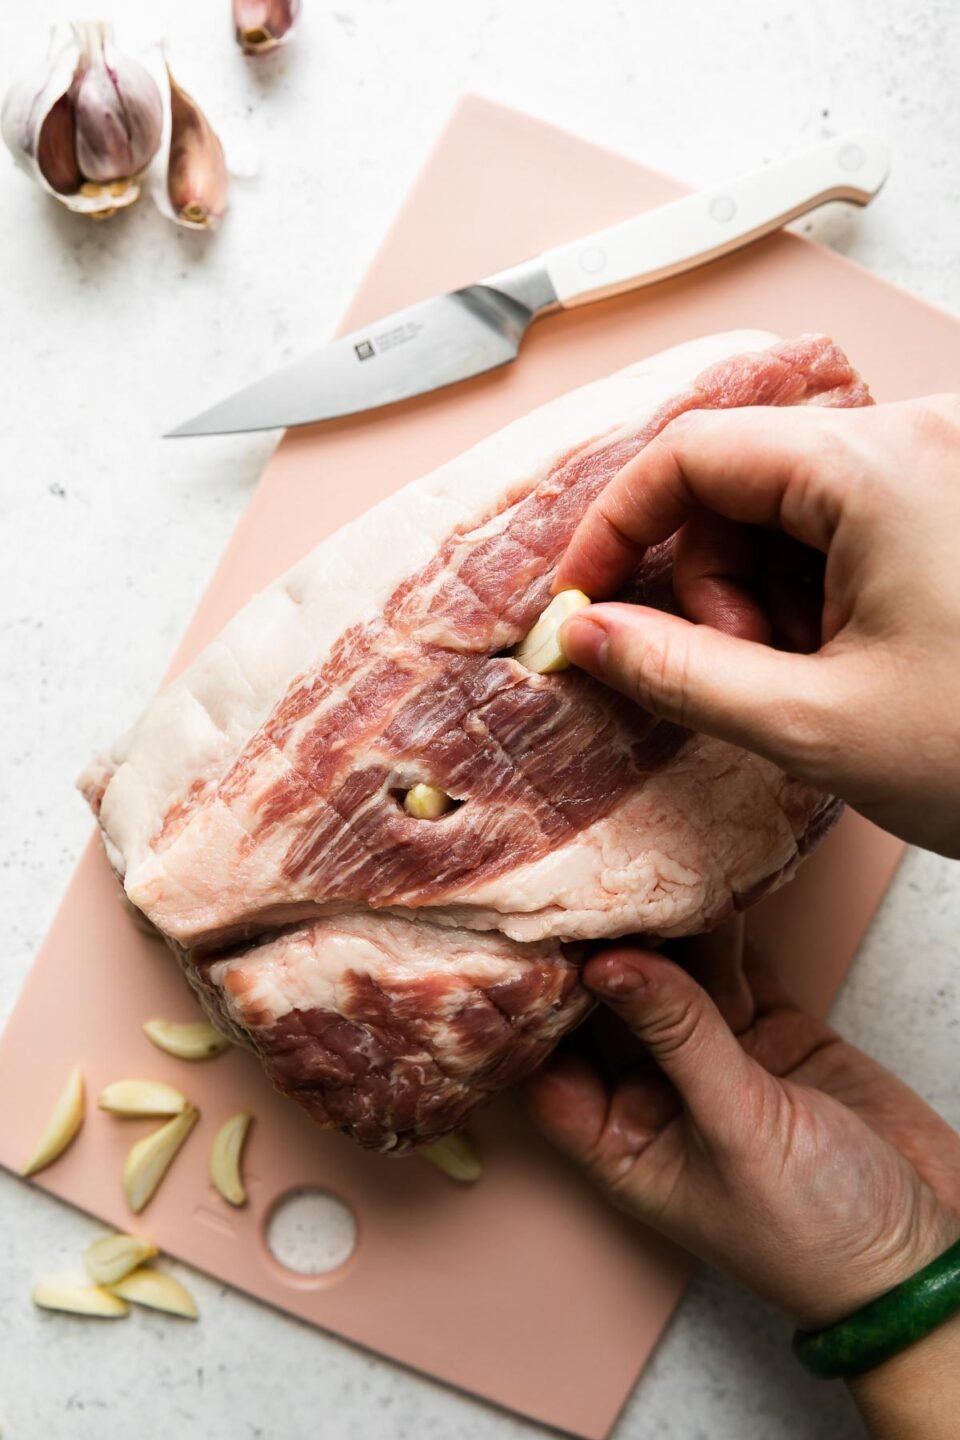 How to make braised carnitas, step 1: Stud & season the pork shoulder. A woman's hands work to insert sliced garlic cloves into slits made within a boneless pork shoulder. The pork shoulder sits atop a pink plastic cutting board that sits atop a creamy white textured surface. A pairing knife with a white handle rests on the cutting board along with a pile of loose peeled & sliced garlic cloves. Partial unpeeled garlic cloves rest alongside the cutting board.